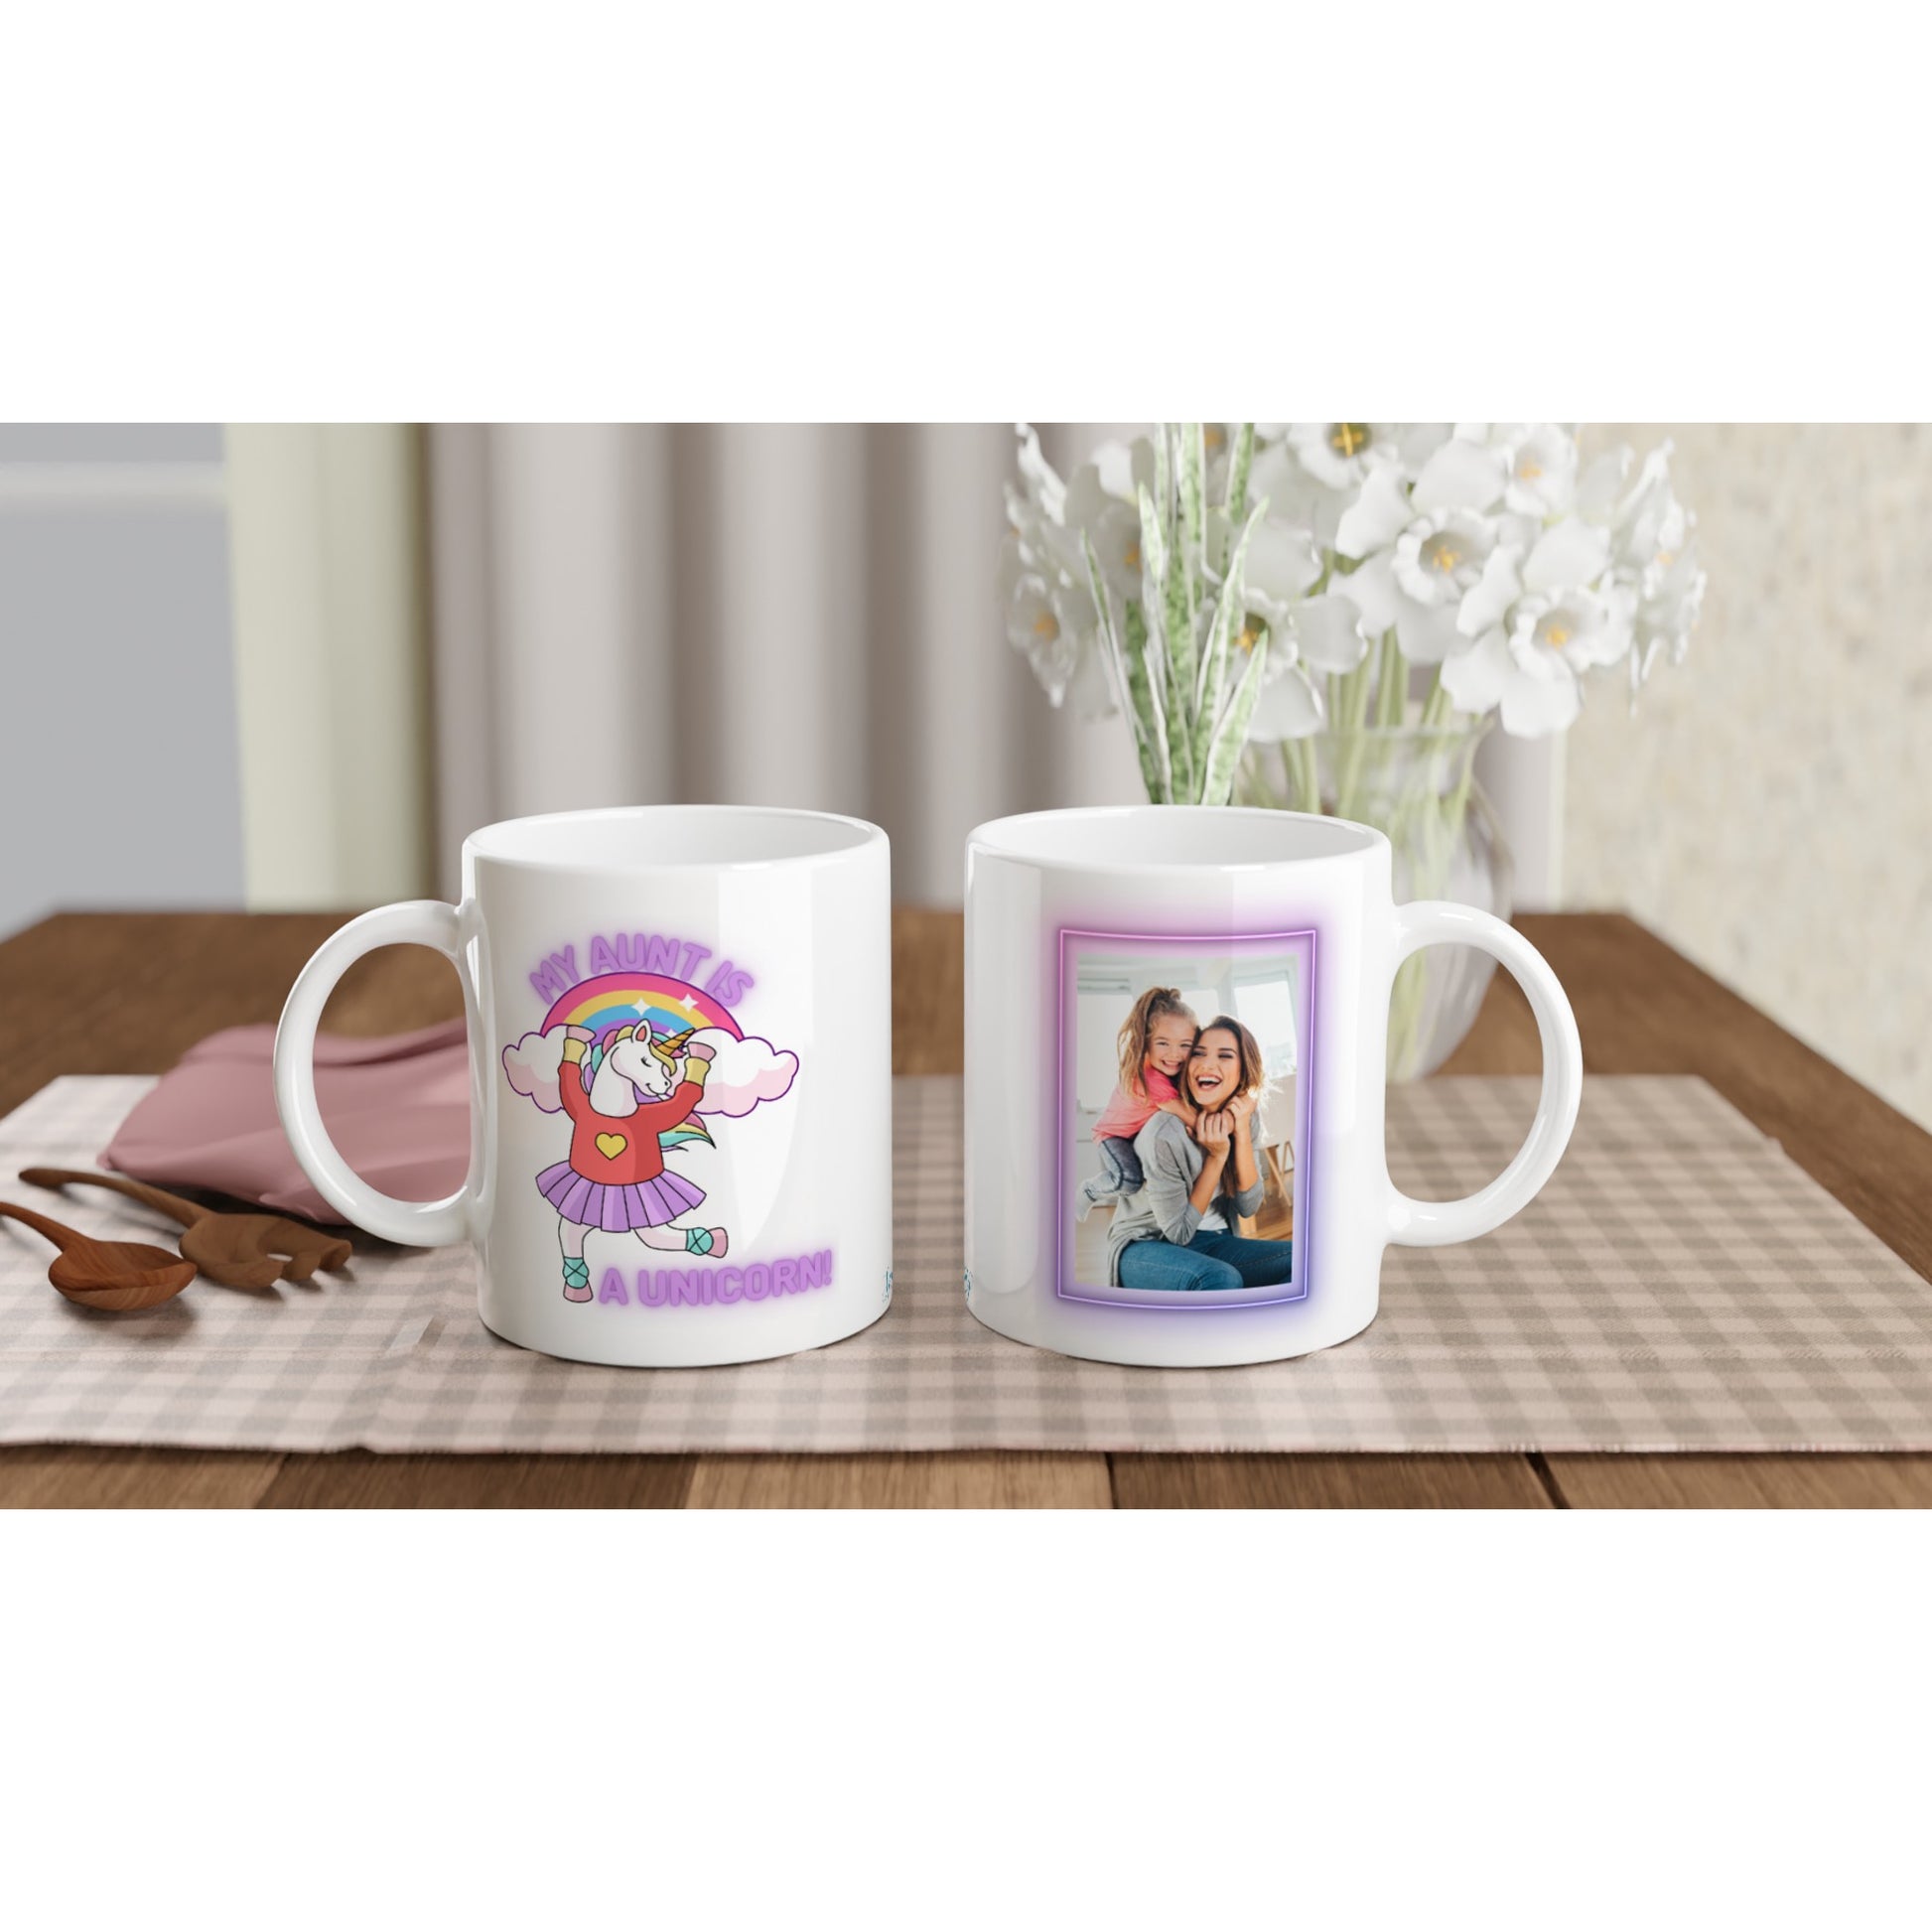 "My Aunt is a Unicorn" Customizable Photo 11 oz. Mug front and back on table view